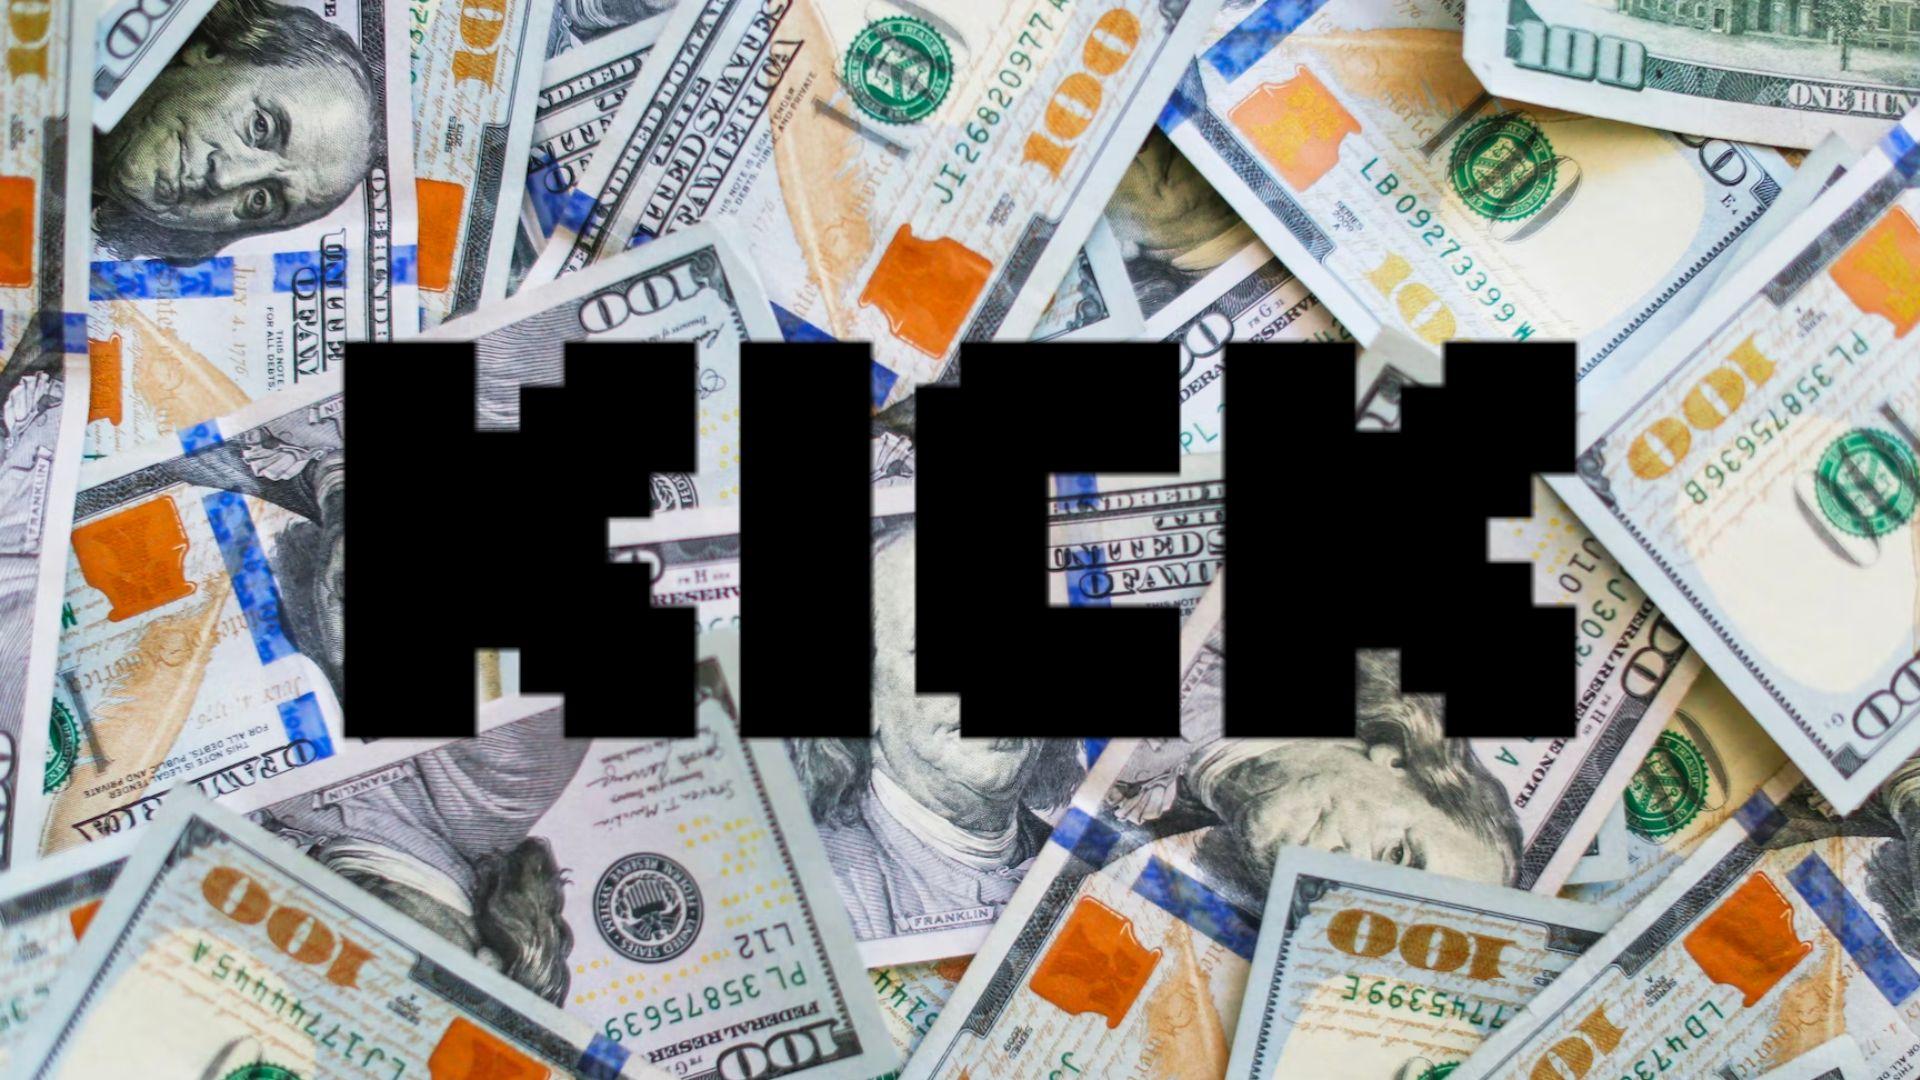 Kick logo surronded by dollars laid out